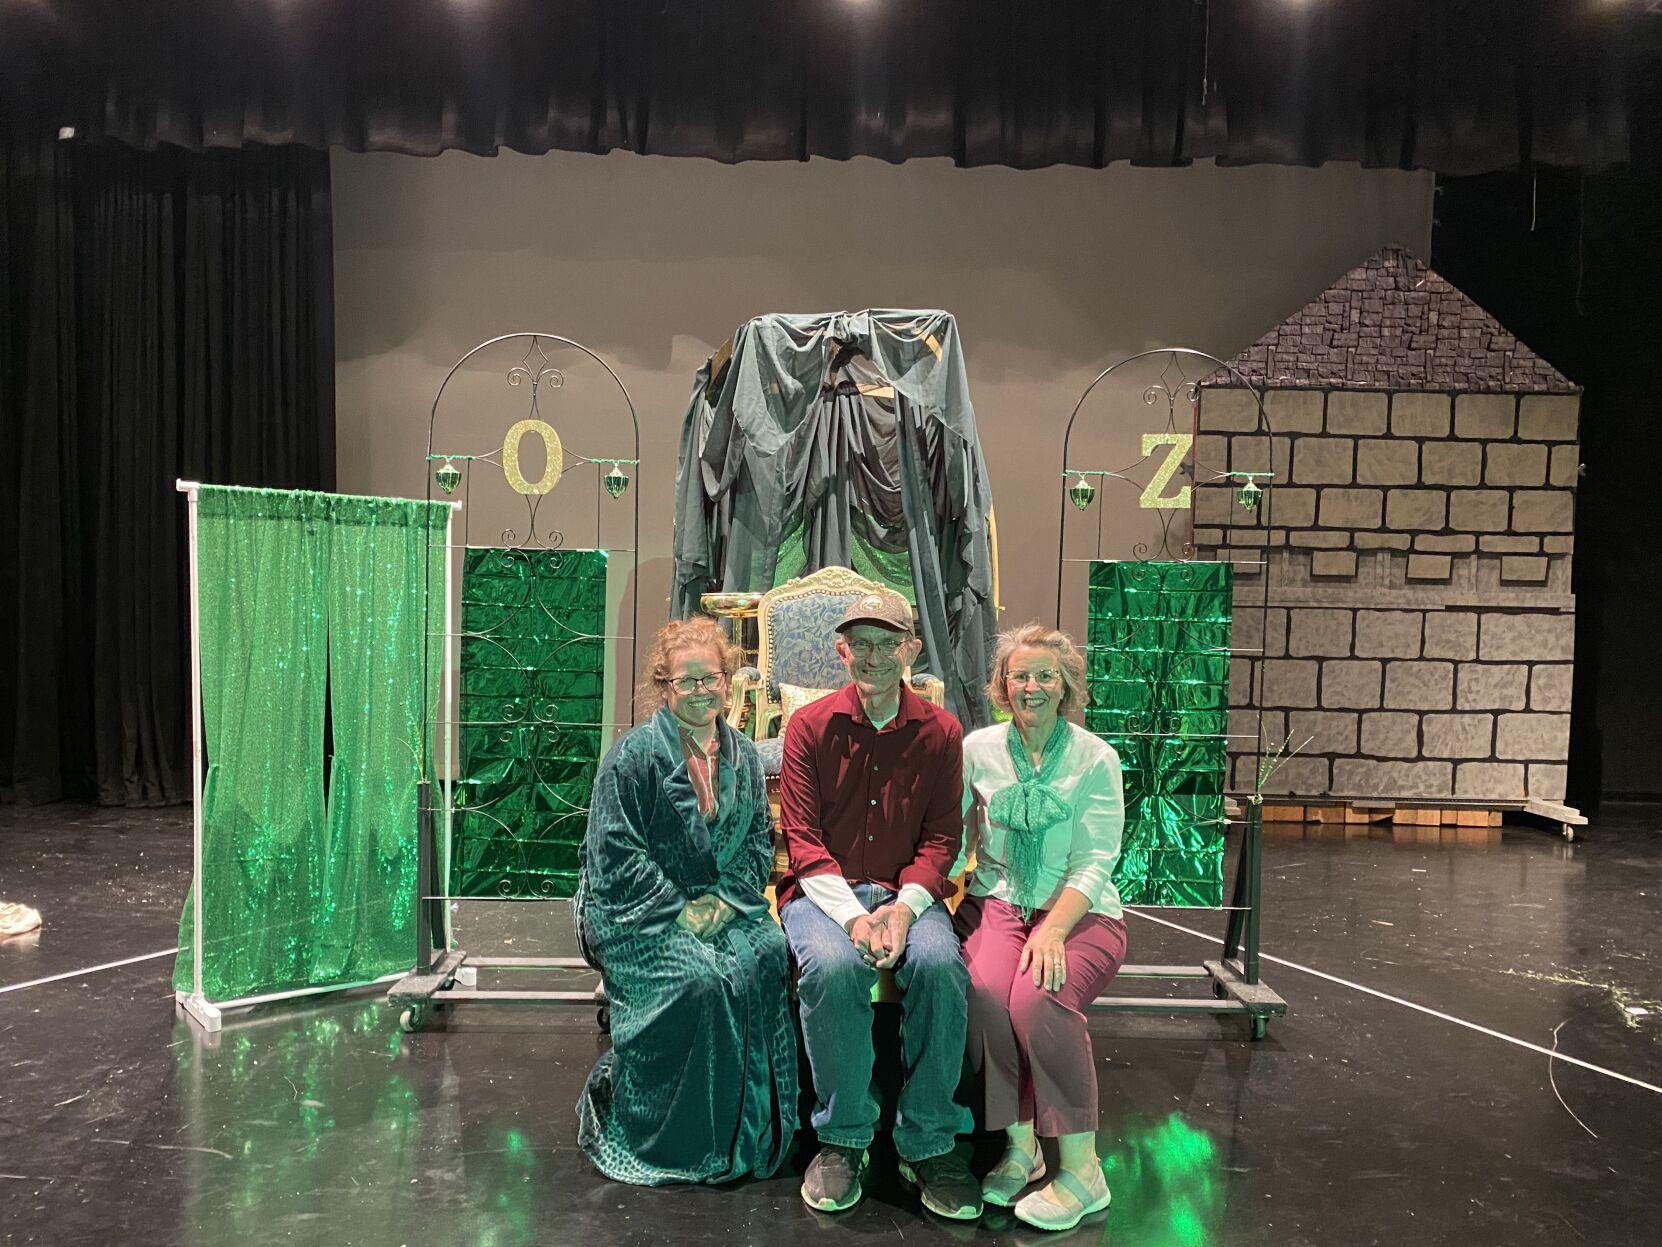 Wizard of Oz, Truckee Community Theater